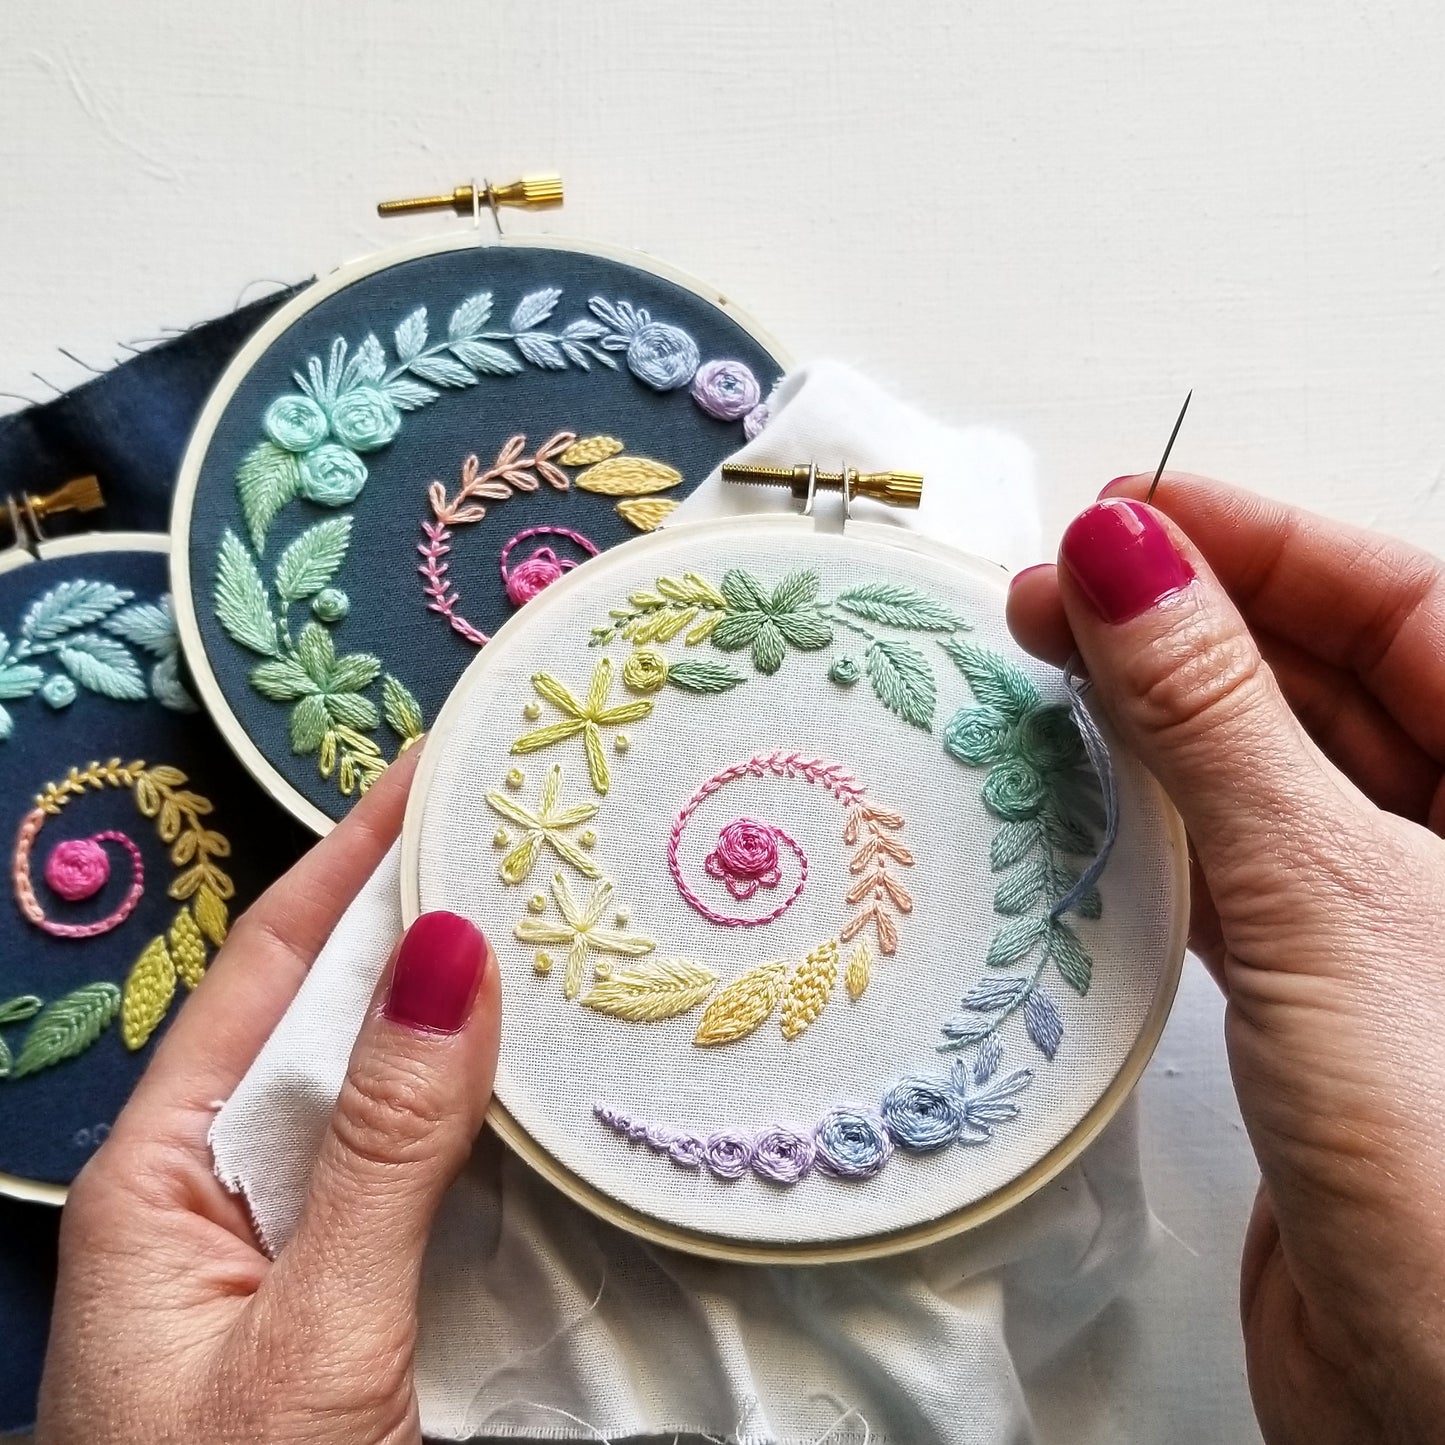 What size of hand embroidery needle should I use? – Jessica Long